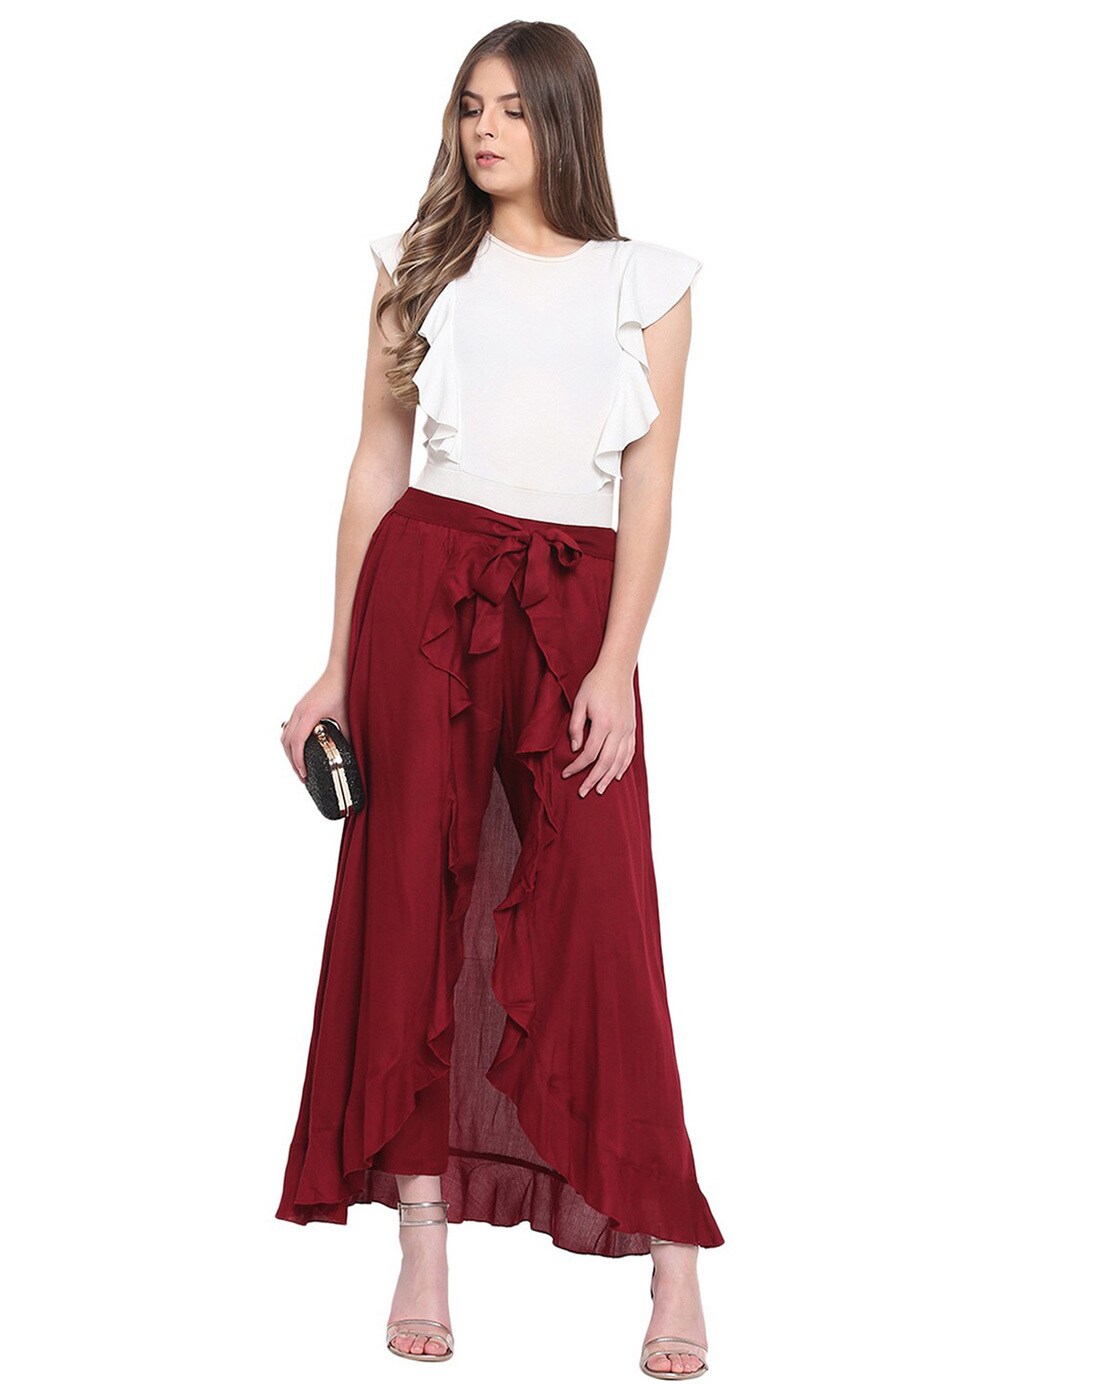 Stone Feather Embroidered Crop Top with Overlay Palazzo pants available  only at Pernia's Pop Up Shop. 2023